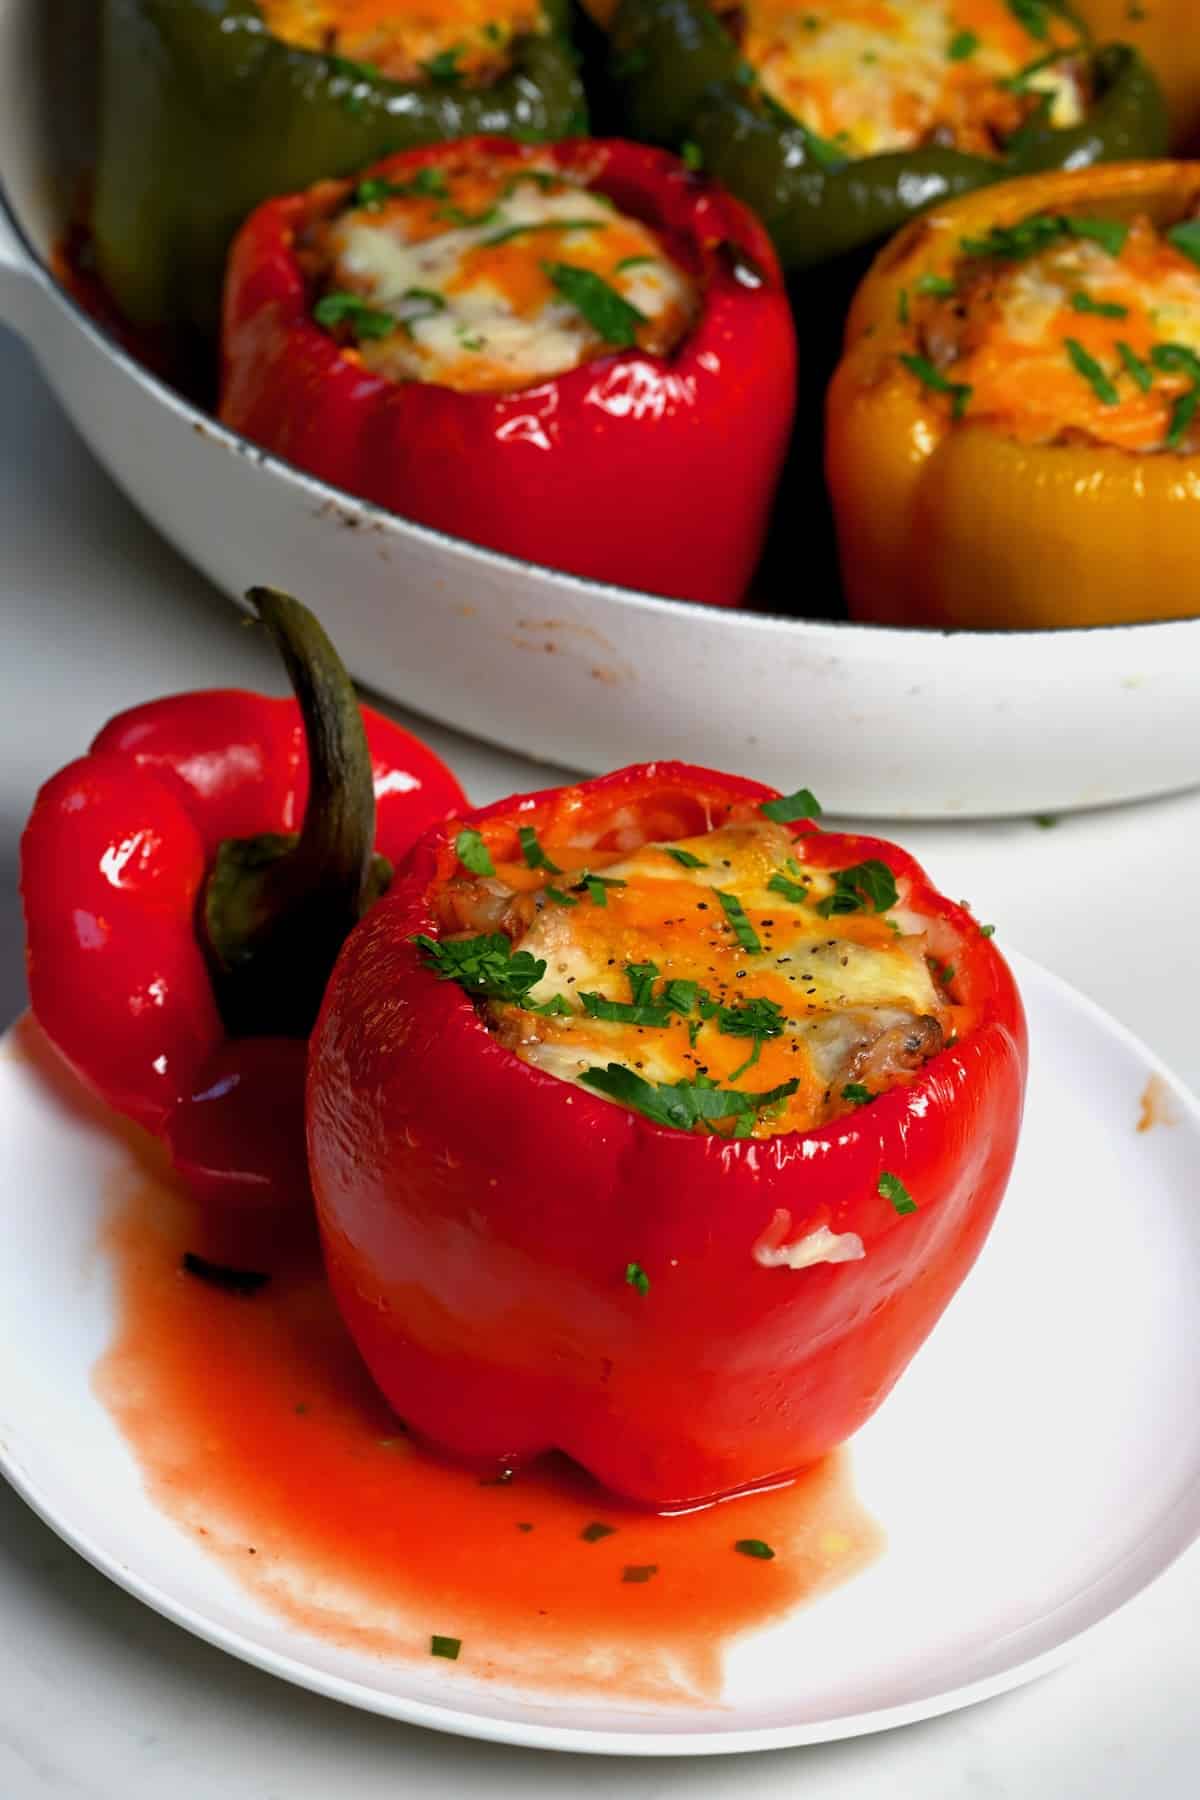 A serving of stuffed red bell pepper topped with melted cheese and parsley